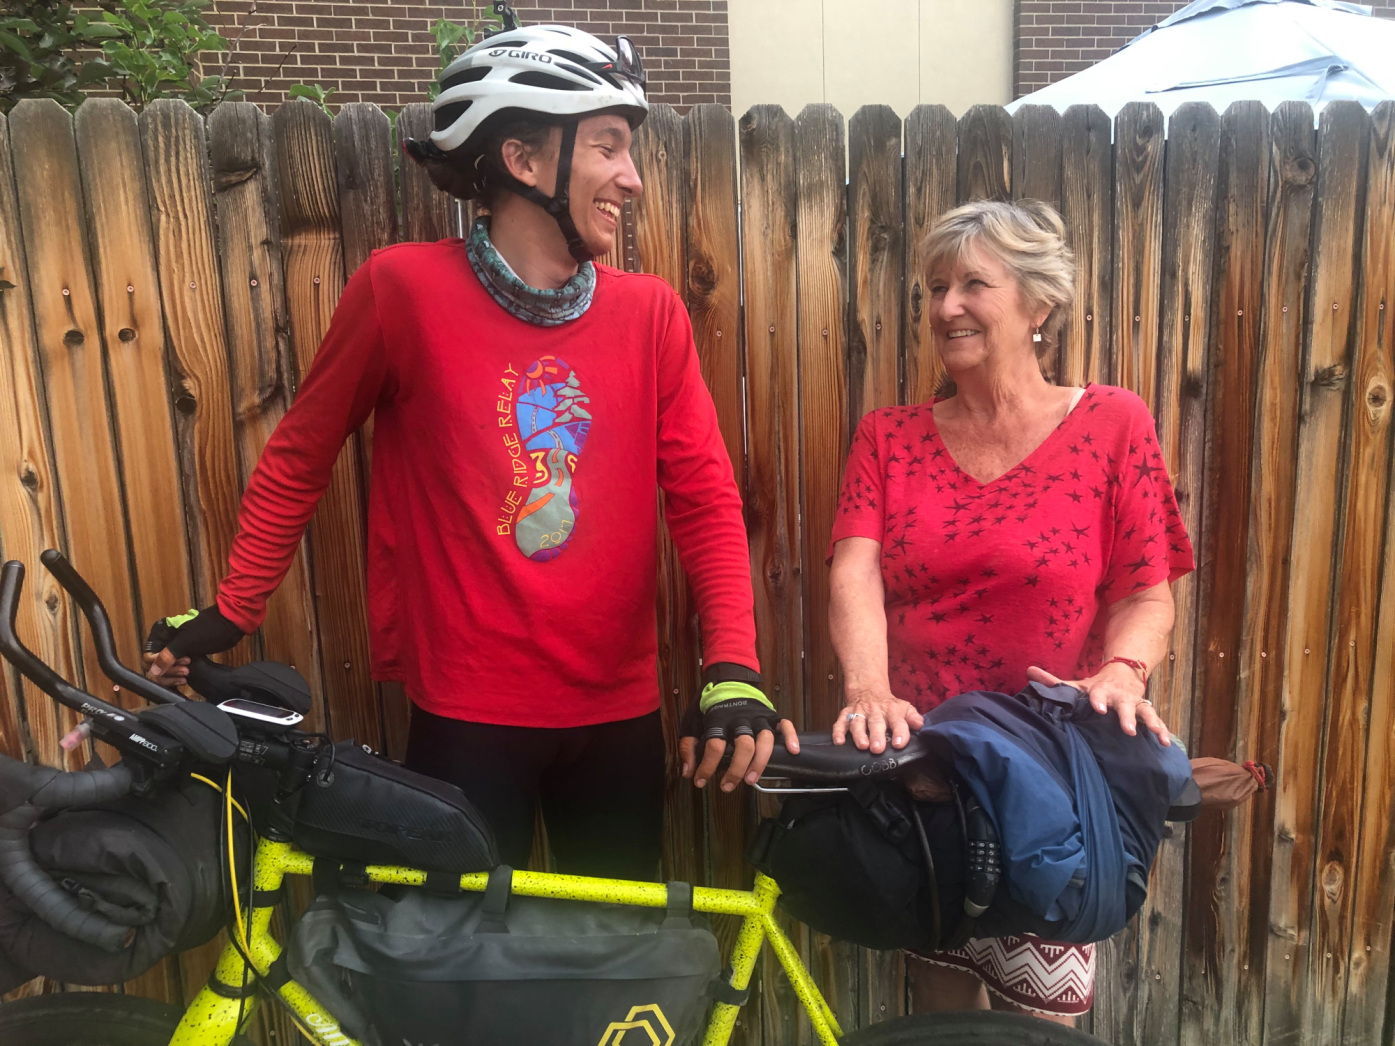 women smiling at a man with a helmet in standing next to a bike